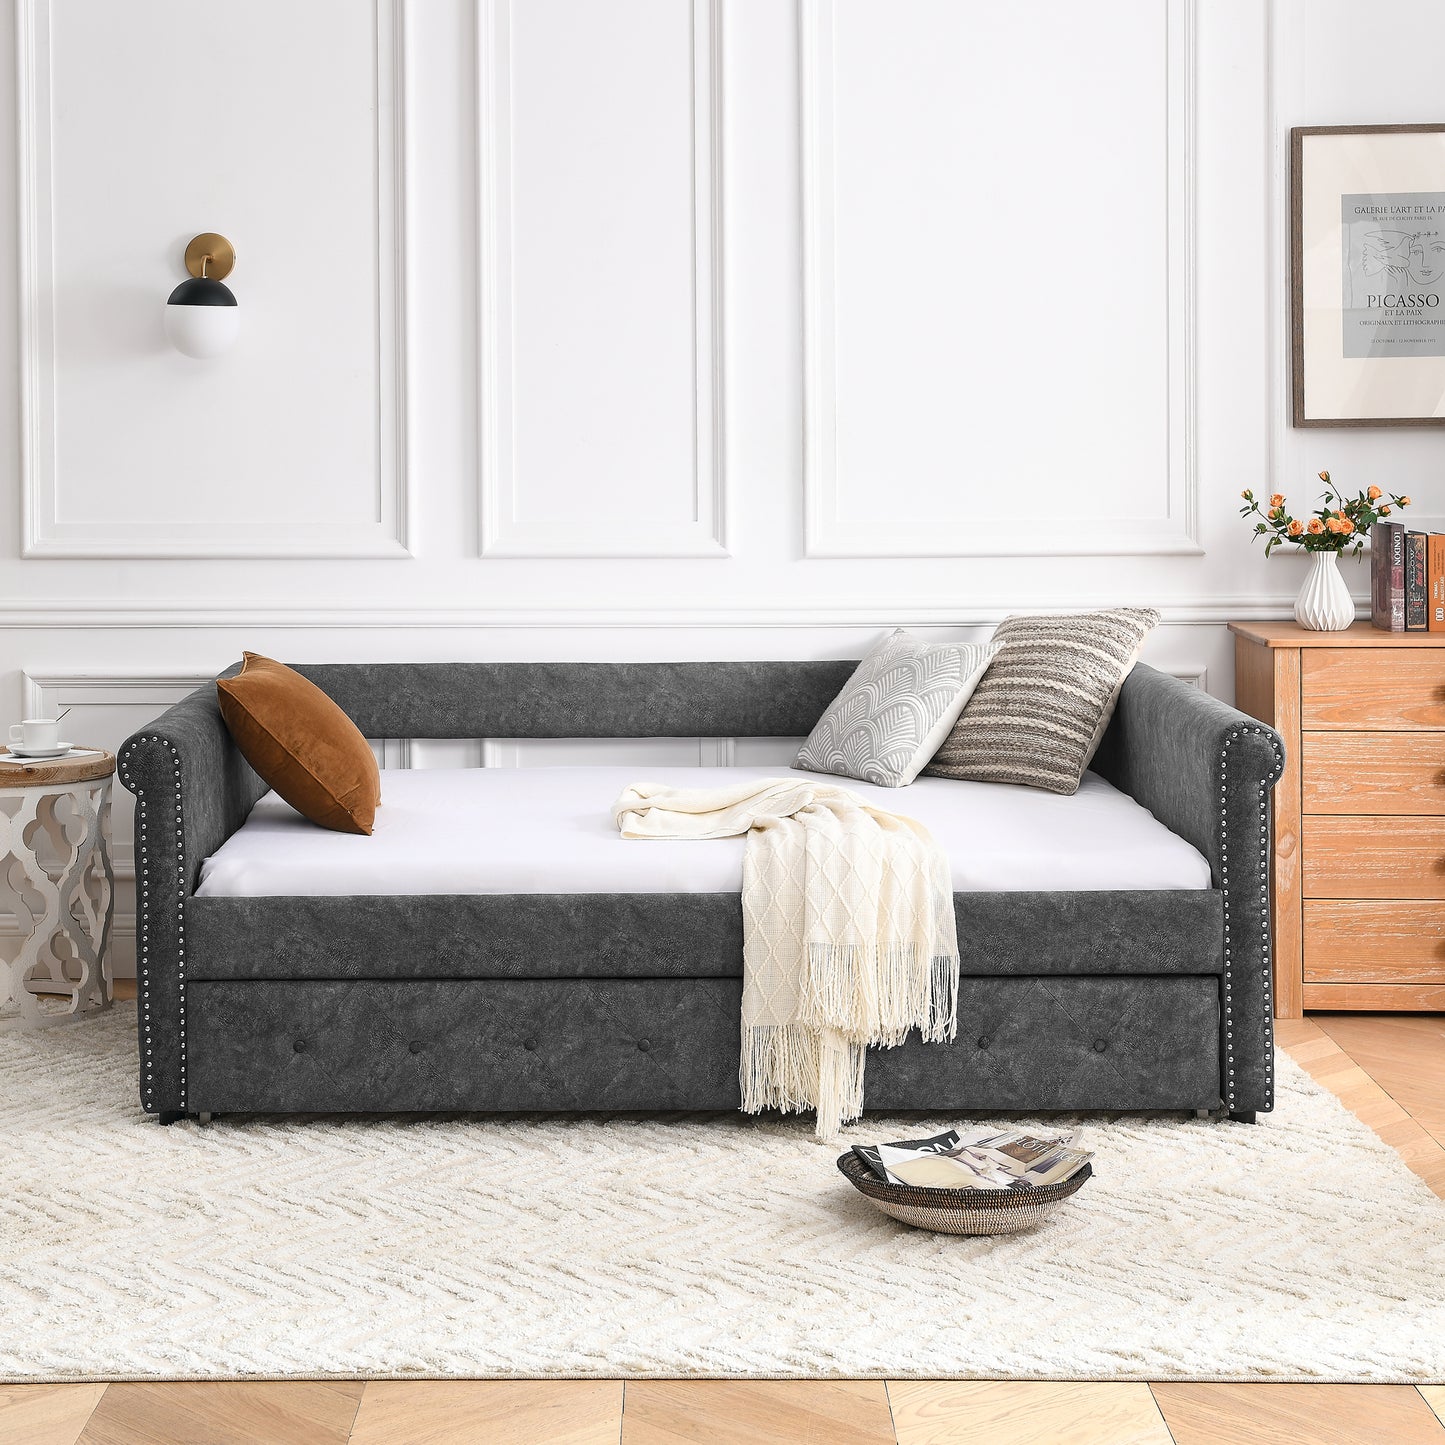 Cassia Dark Gray Daybed with Trundle (Full/twin)